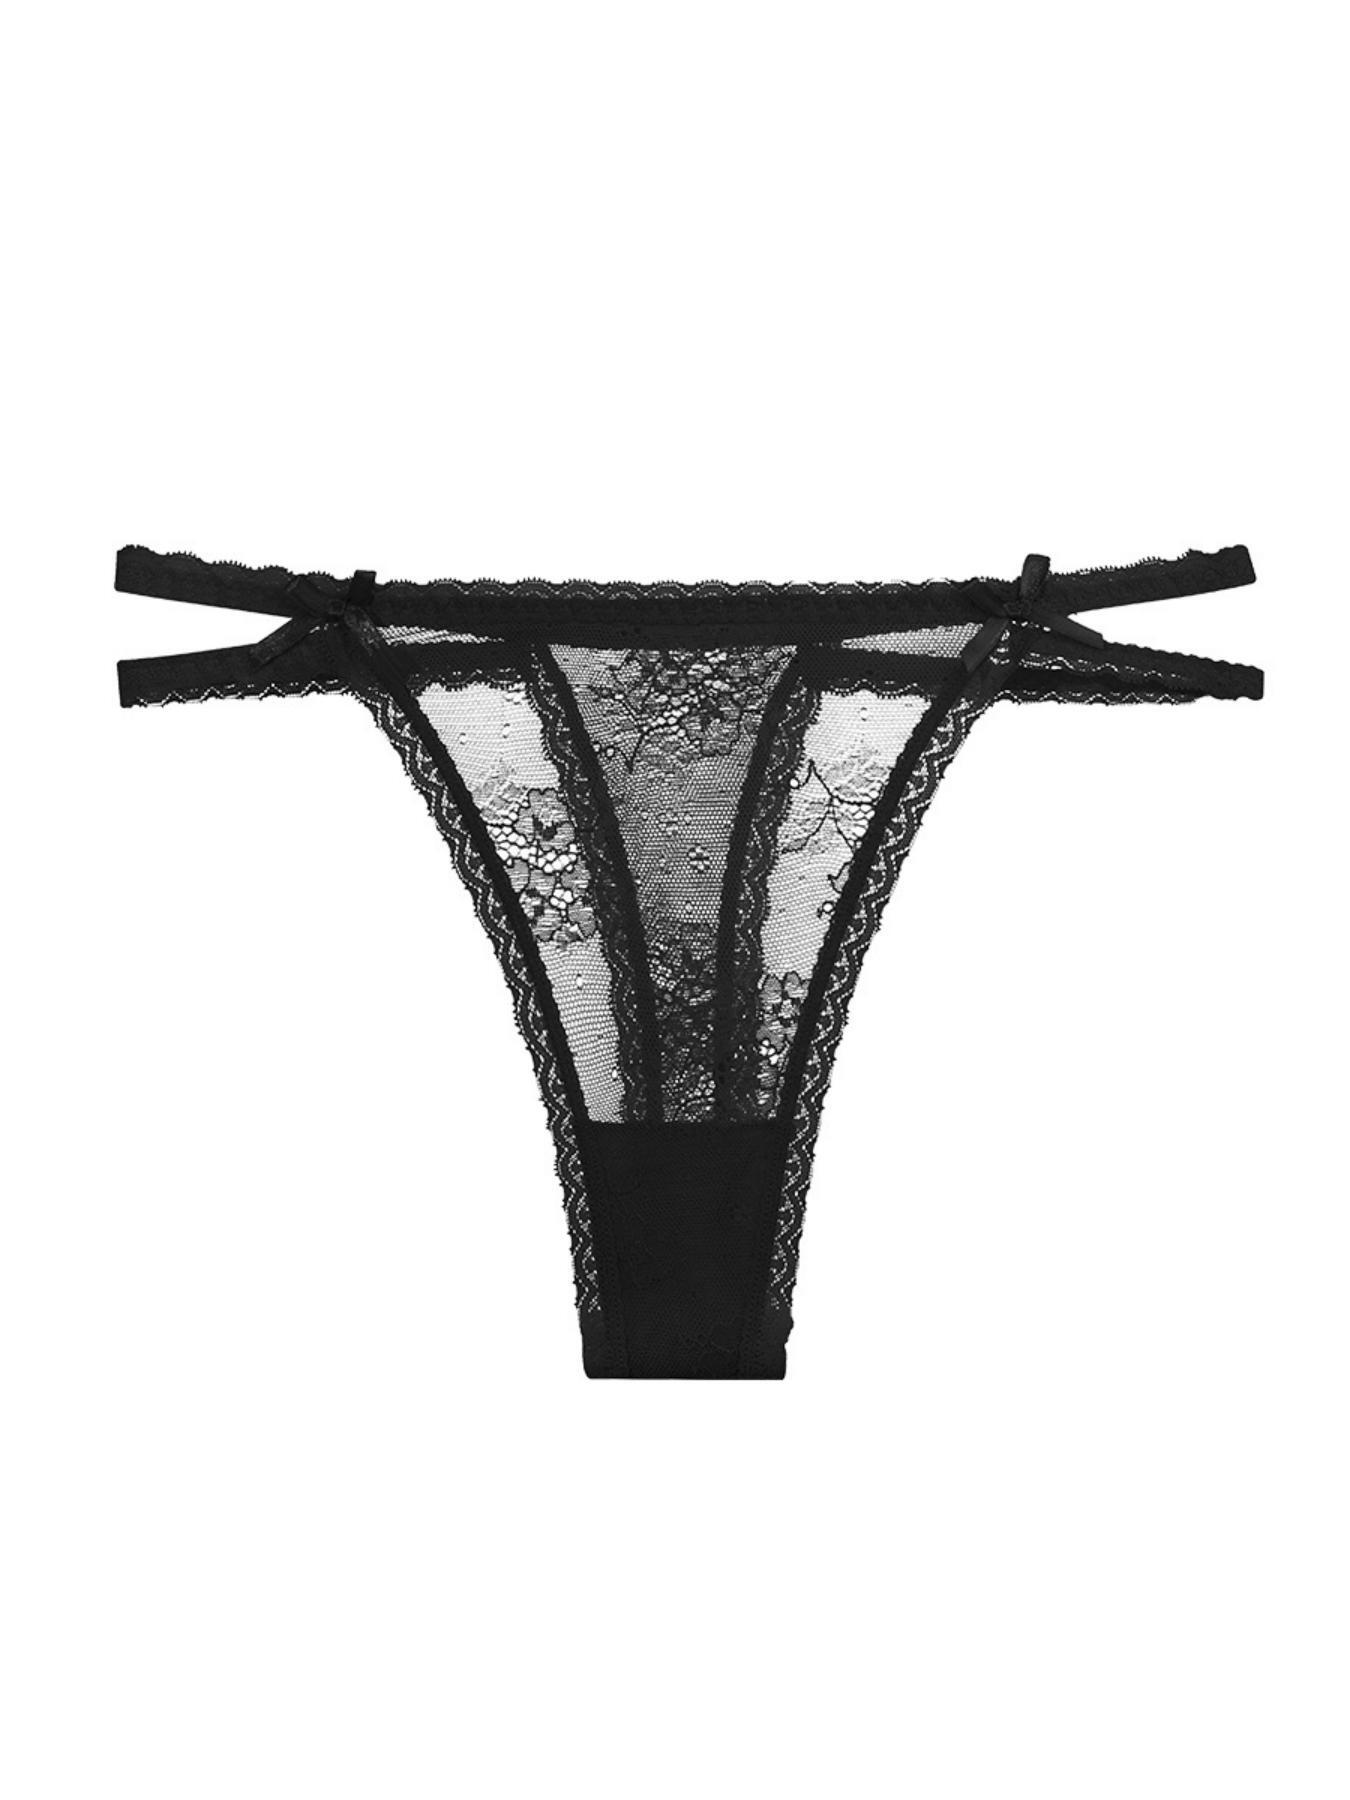 Floral Lace Semi Sheer Bow Cut Out Thongs, Comfy & Breathable Intimates Panties, Women's Lingerie & Underwear